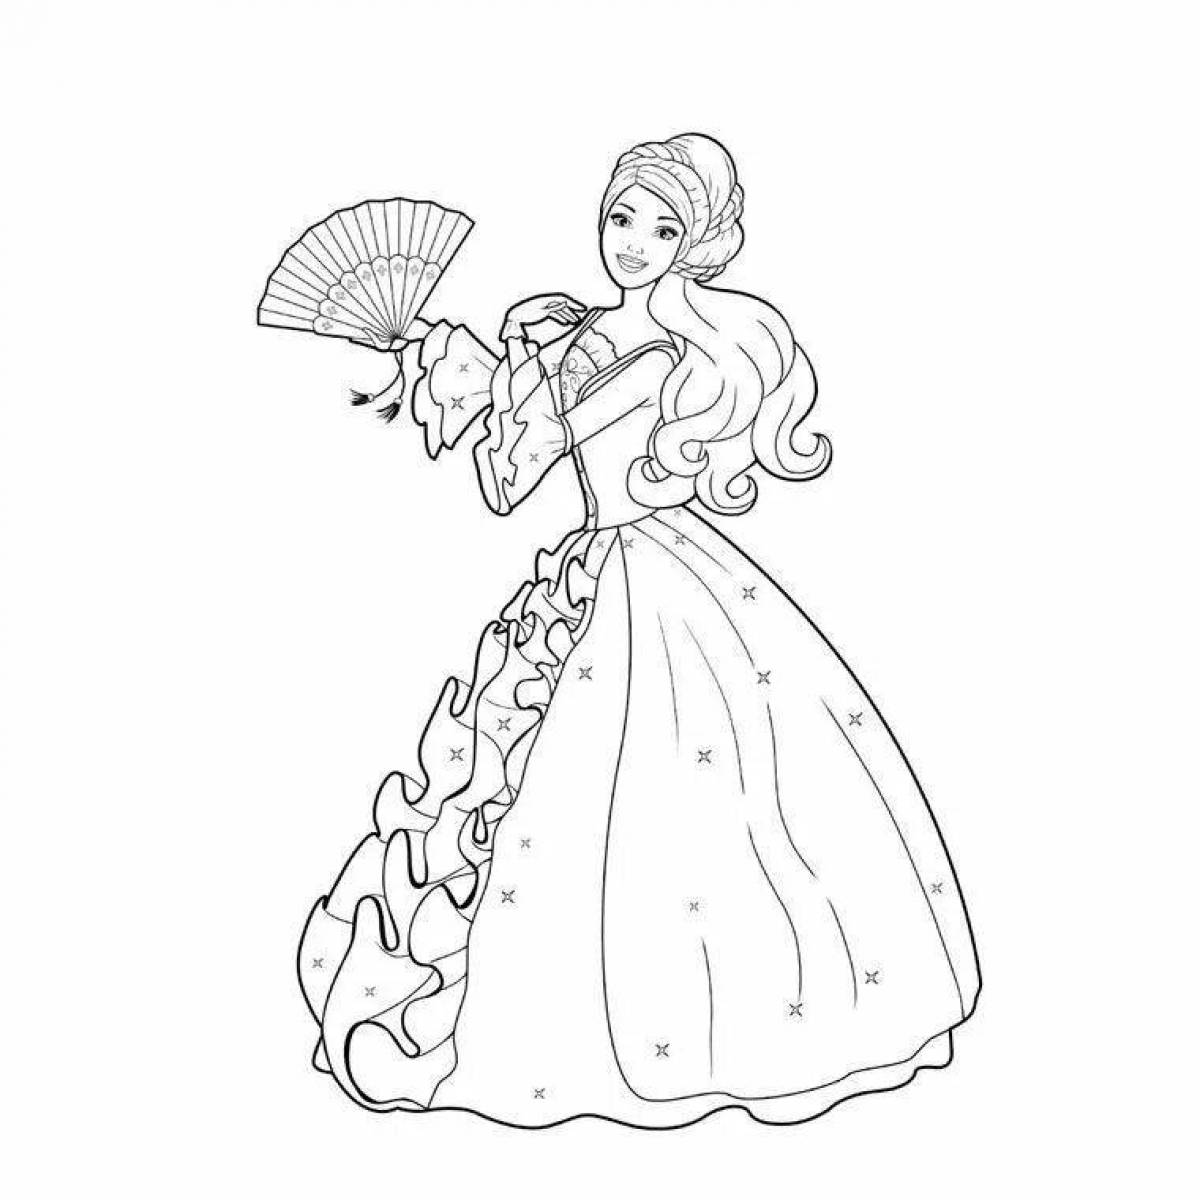 Exquisite coloring book for girls princesses in beautiful dresses